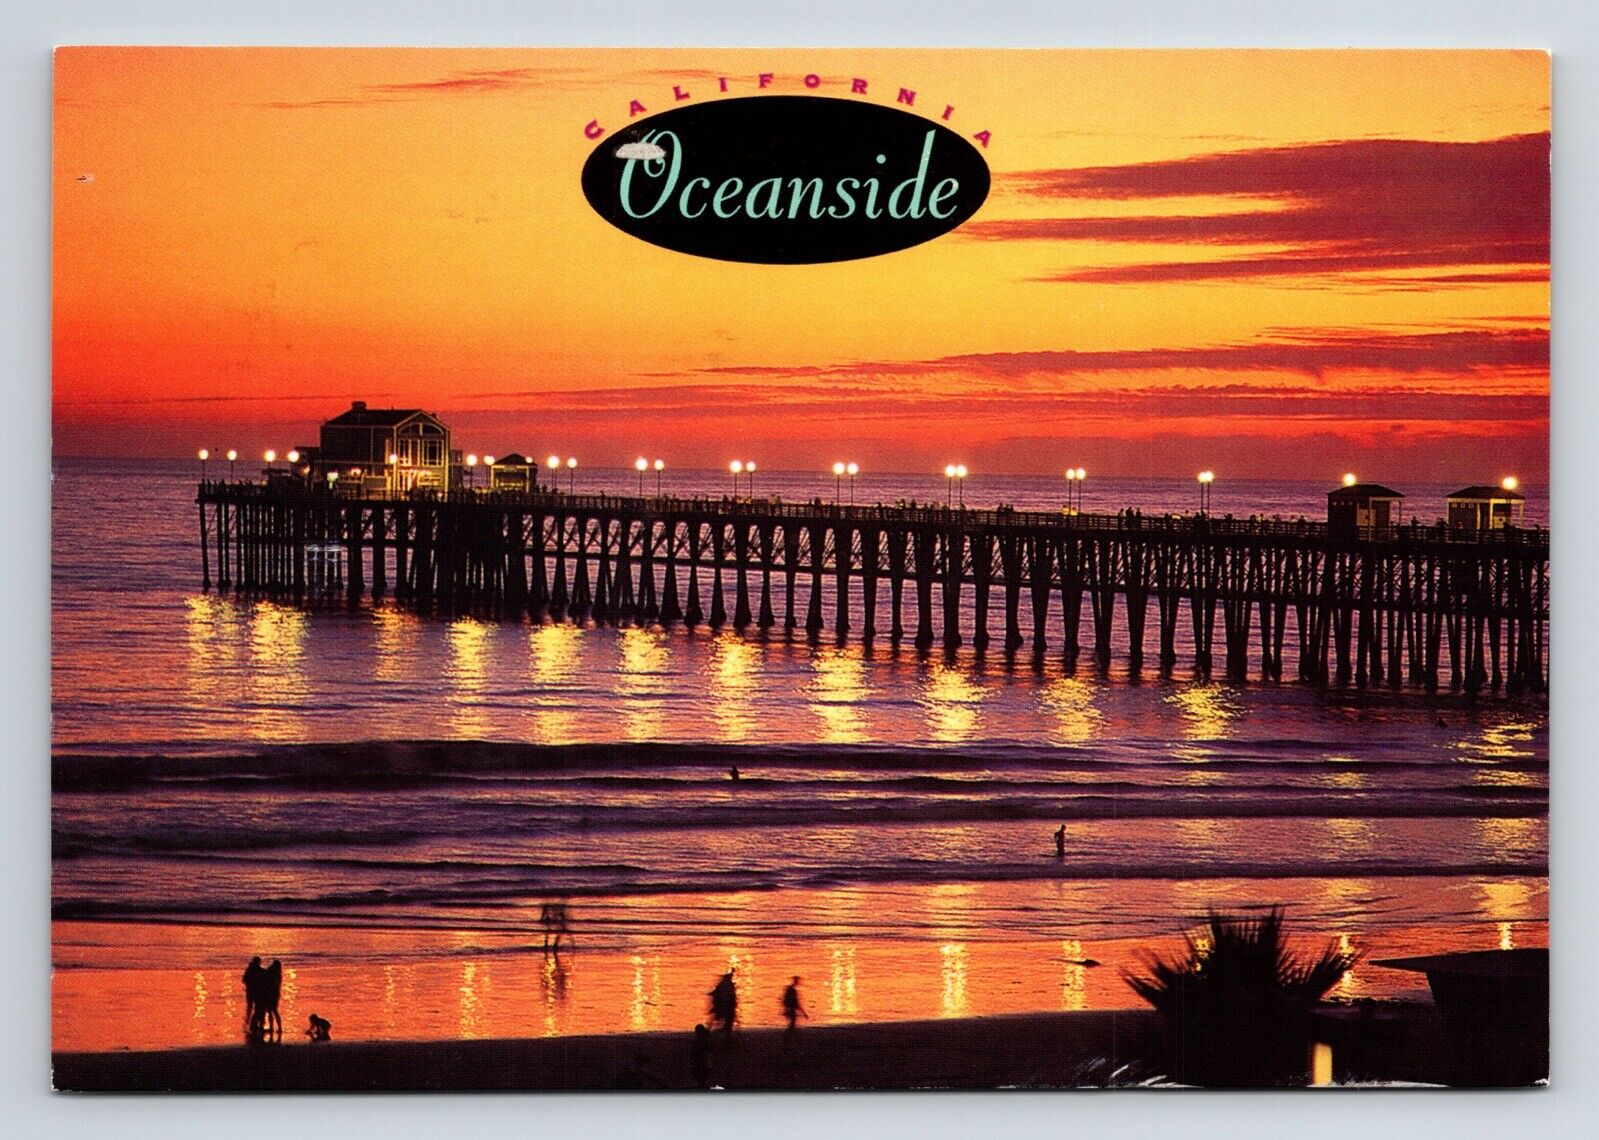 California Sunset View Oceanside Pier San Diego Postcard Pm Note Wob